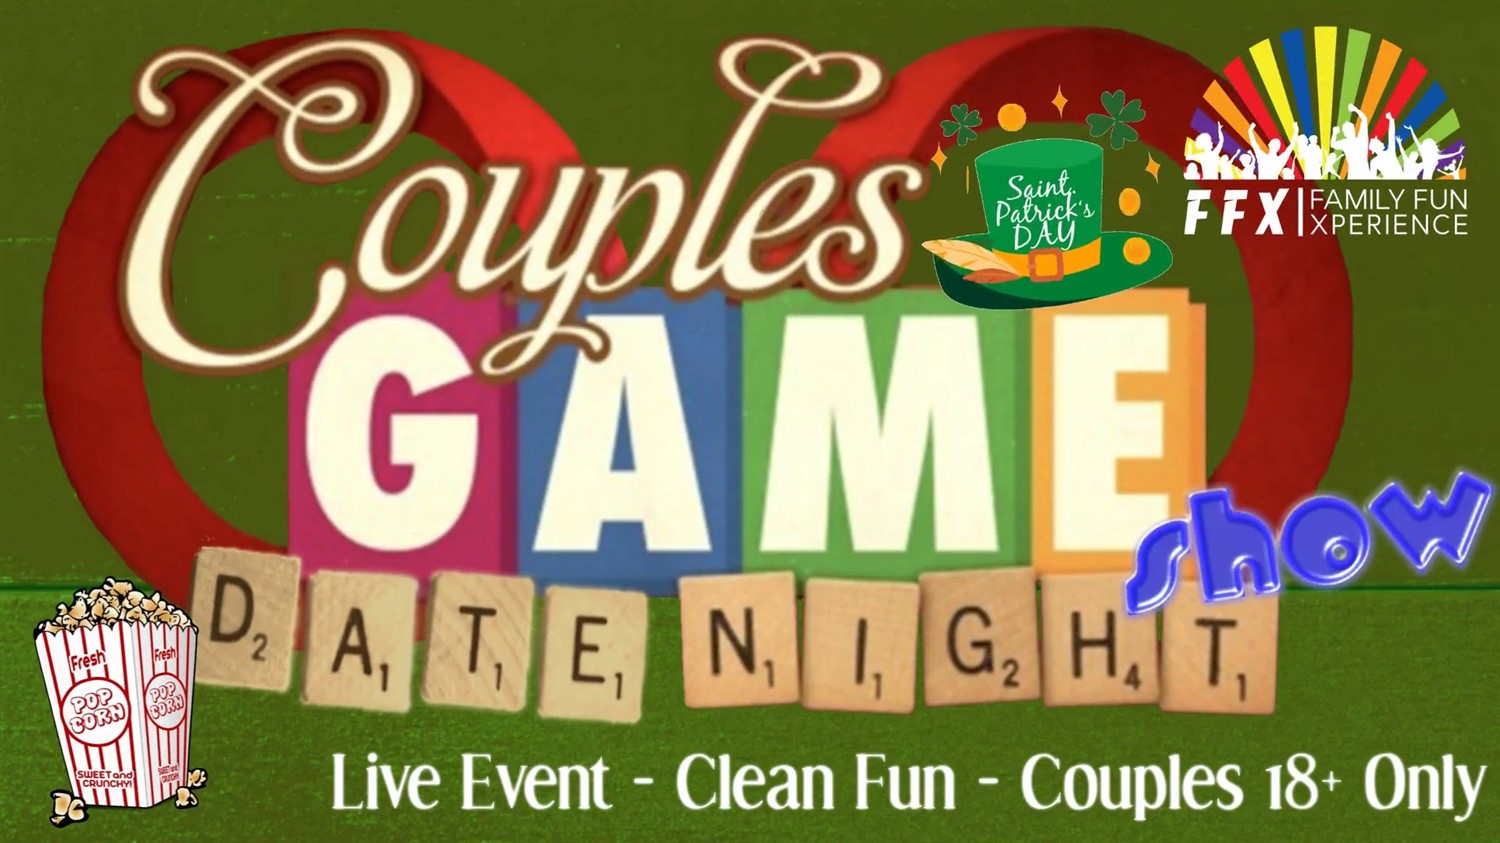 COUPLES DATE NIGHT GAME SHOW 18+ Only on Apr 26, 19:00@FFX Theatre - Pick a seat, Buy tickets and Get information on Family Fun Xperience tickets.ffxshow.org